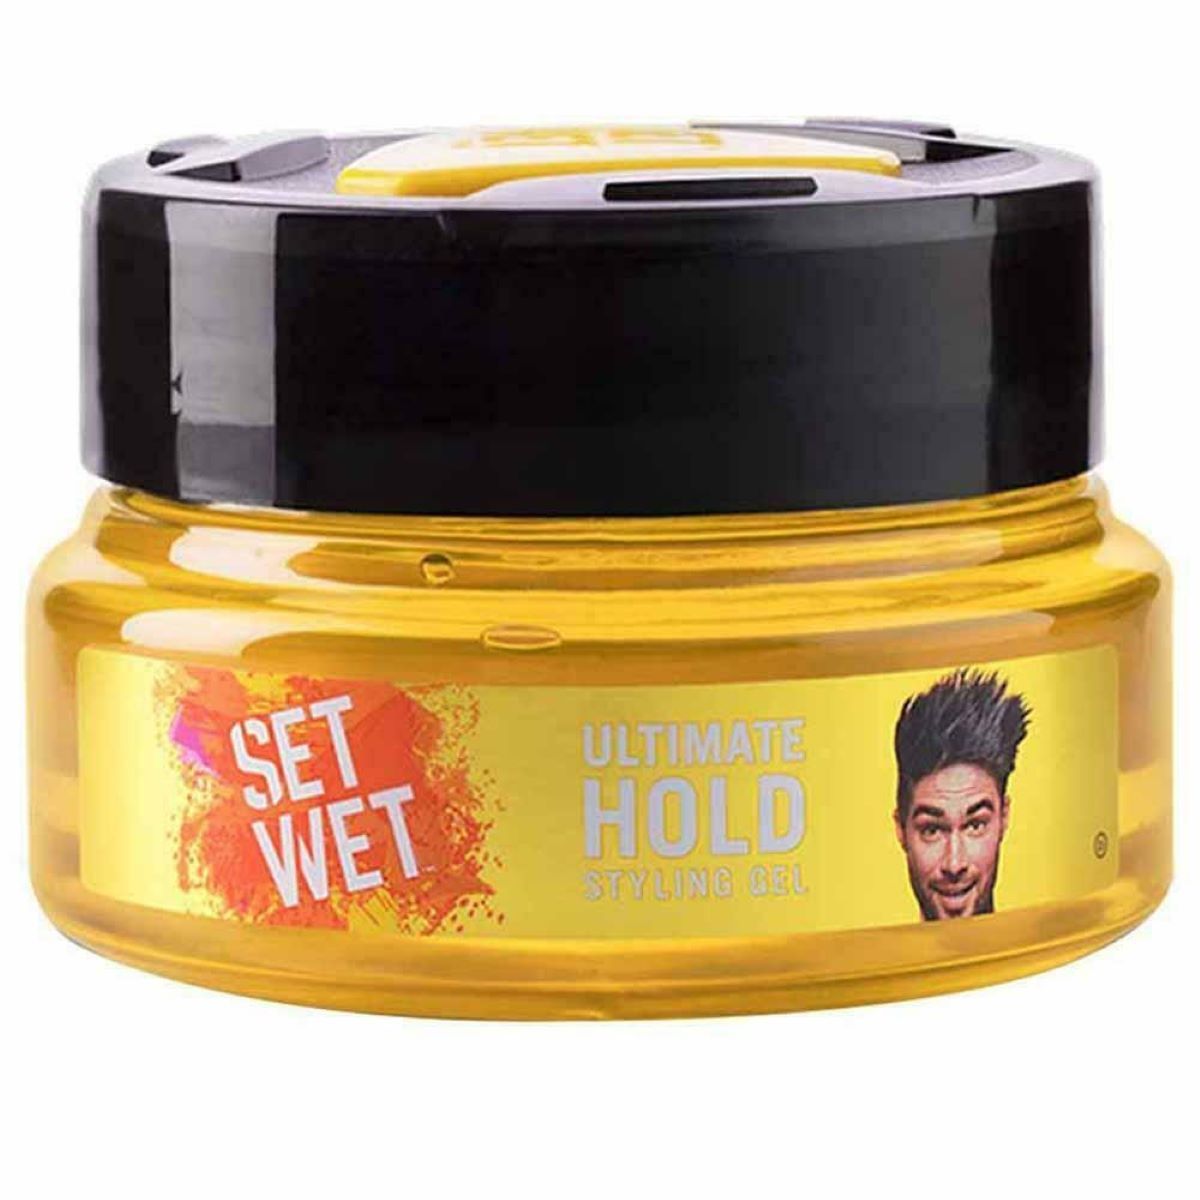 Set Wet Ultimate Hold Hair Styling Gel, 250 ml Price, Uses, Side Effects,  Composition - Apollo Pharmacy